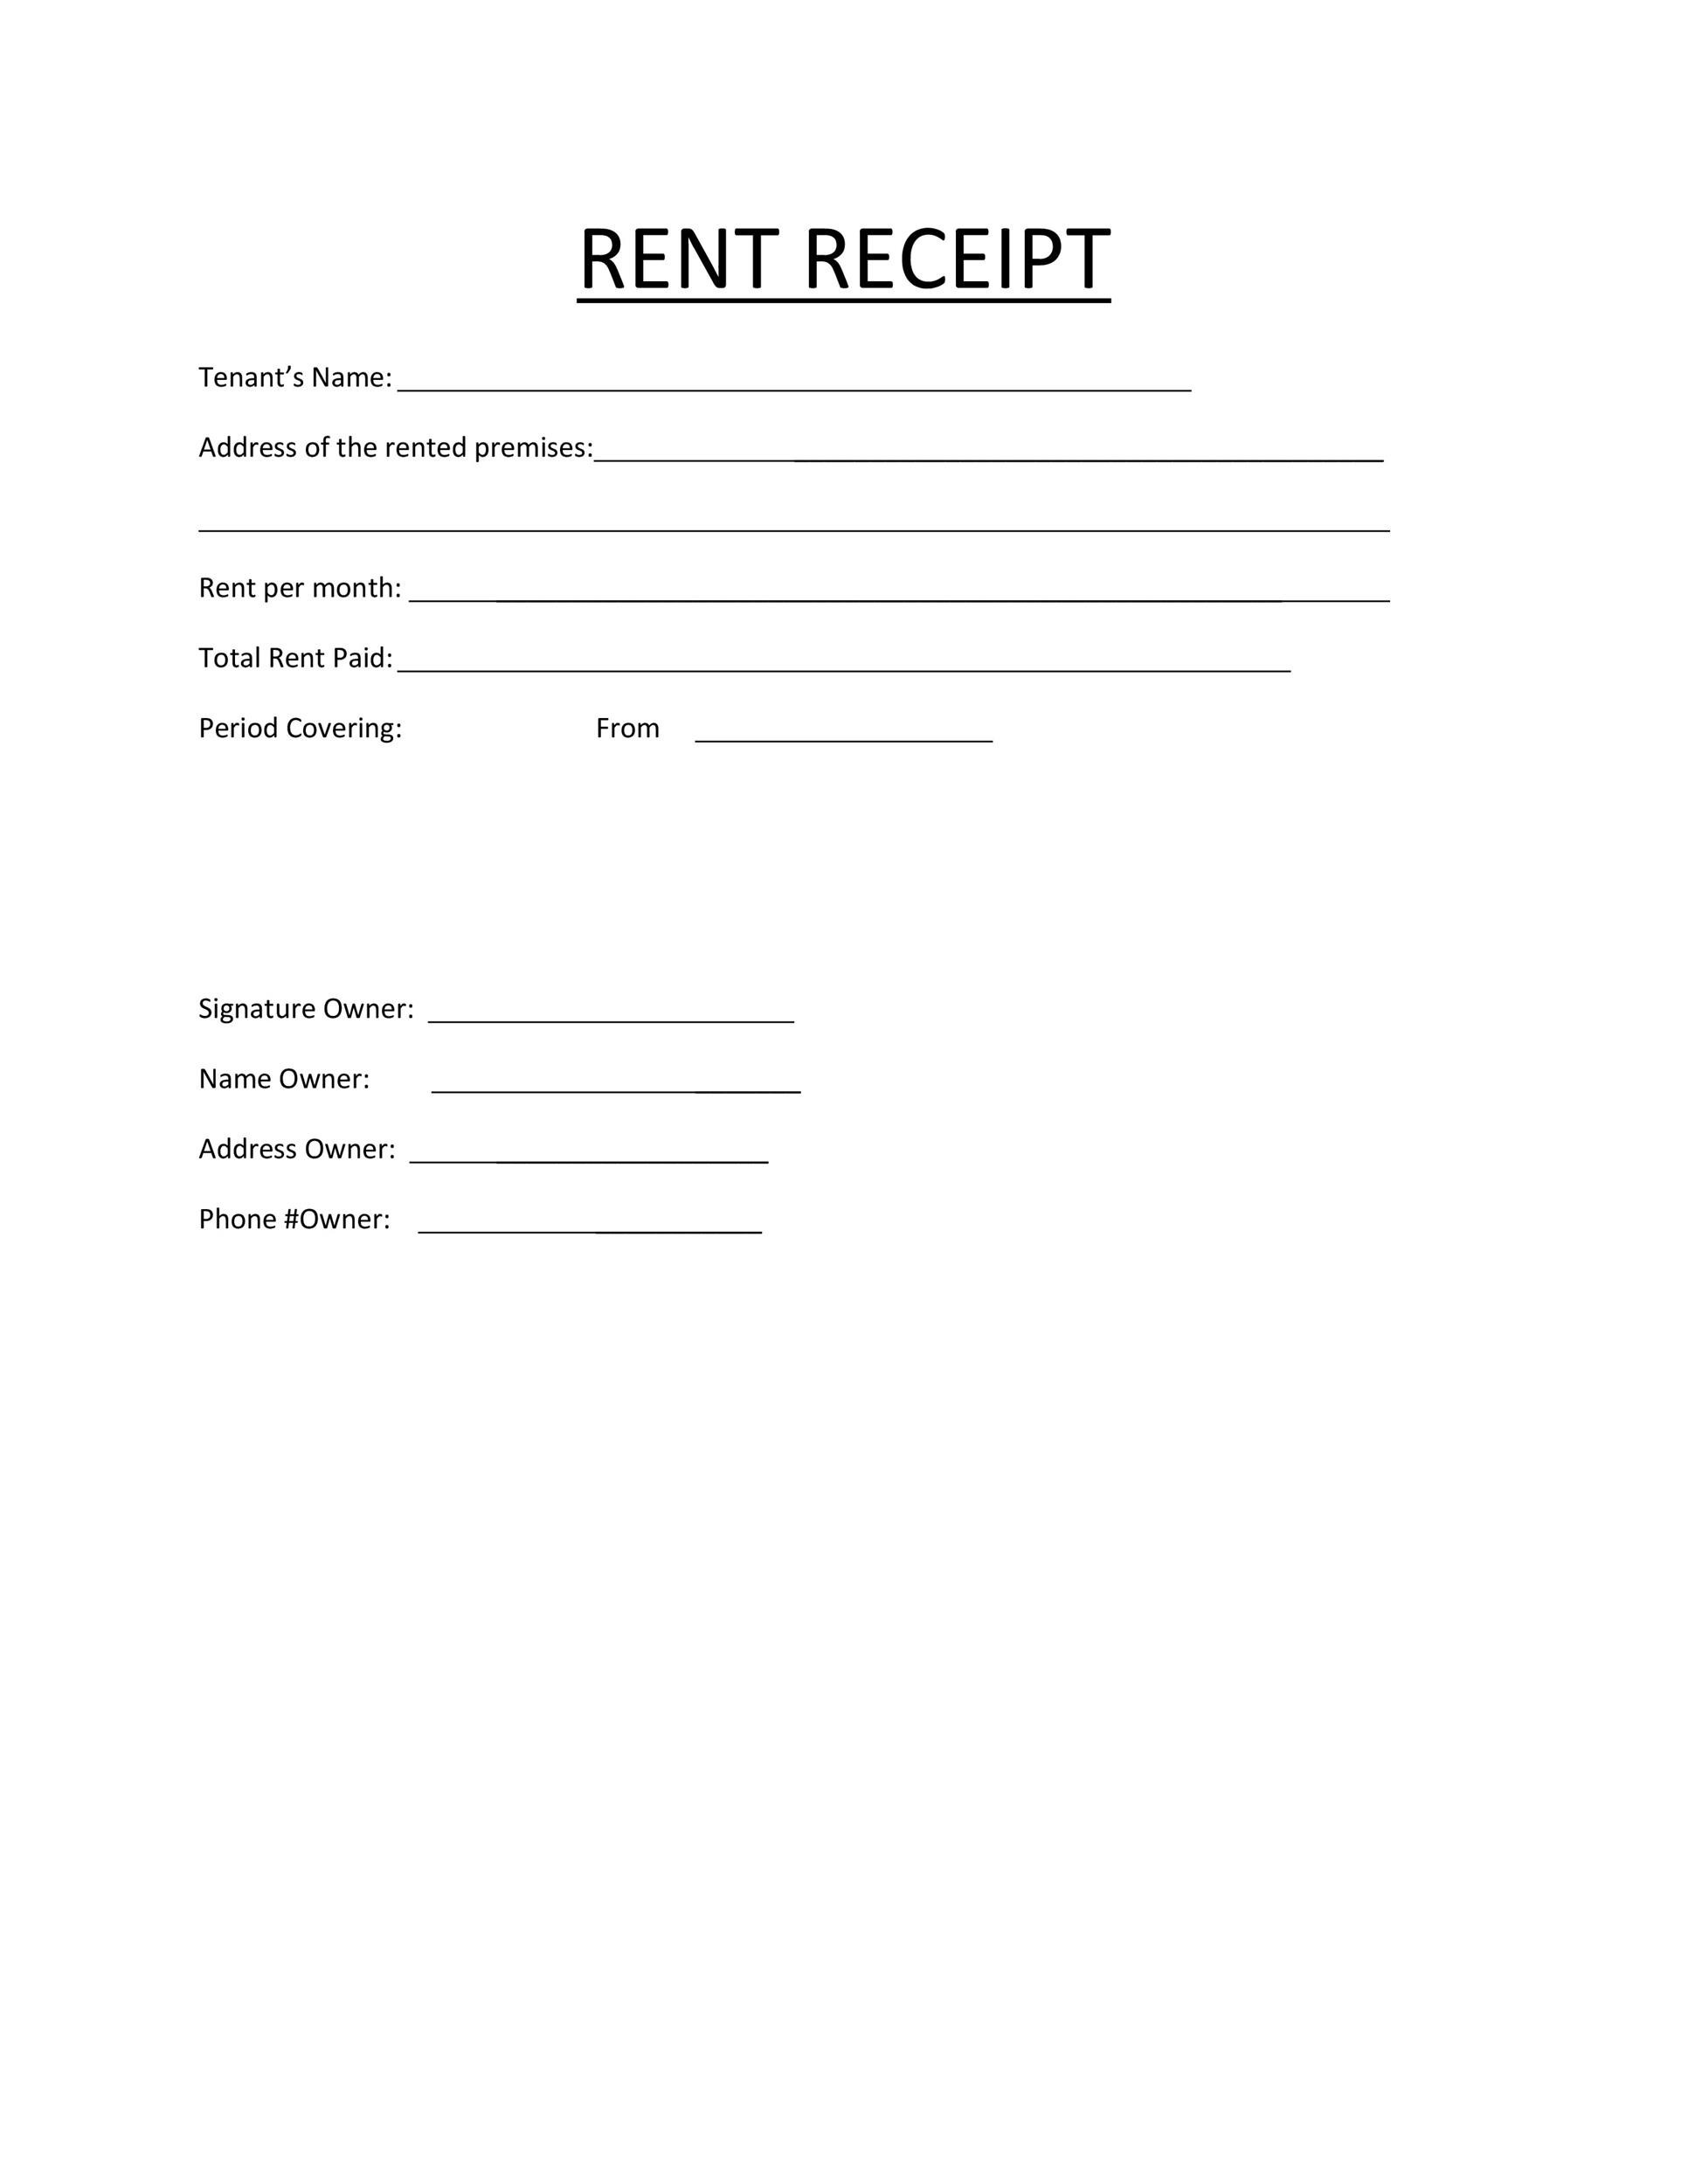 rent-received-receipt-format-tutore-org-master-of-documents